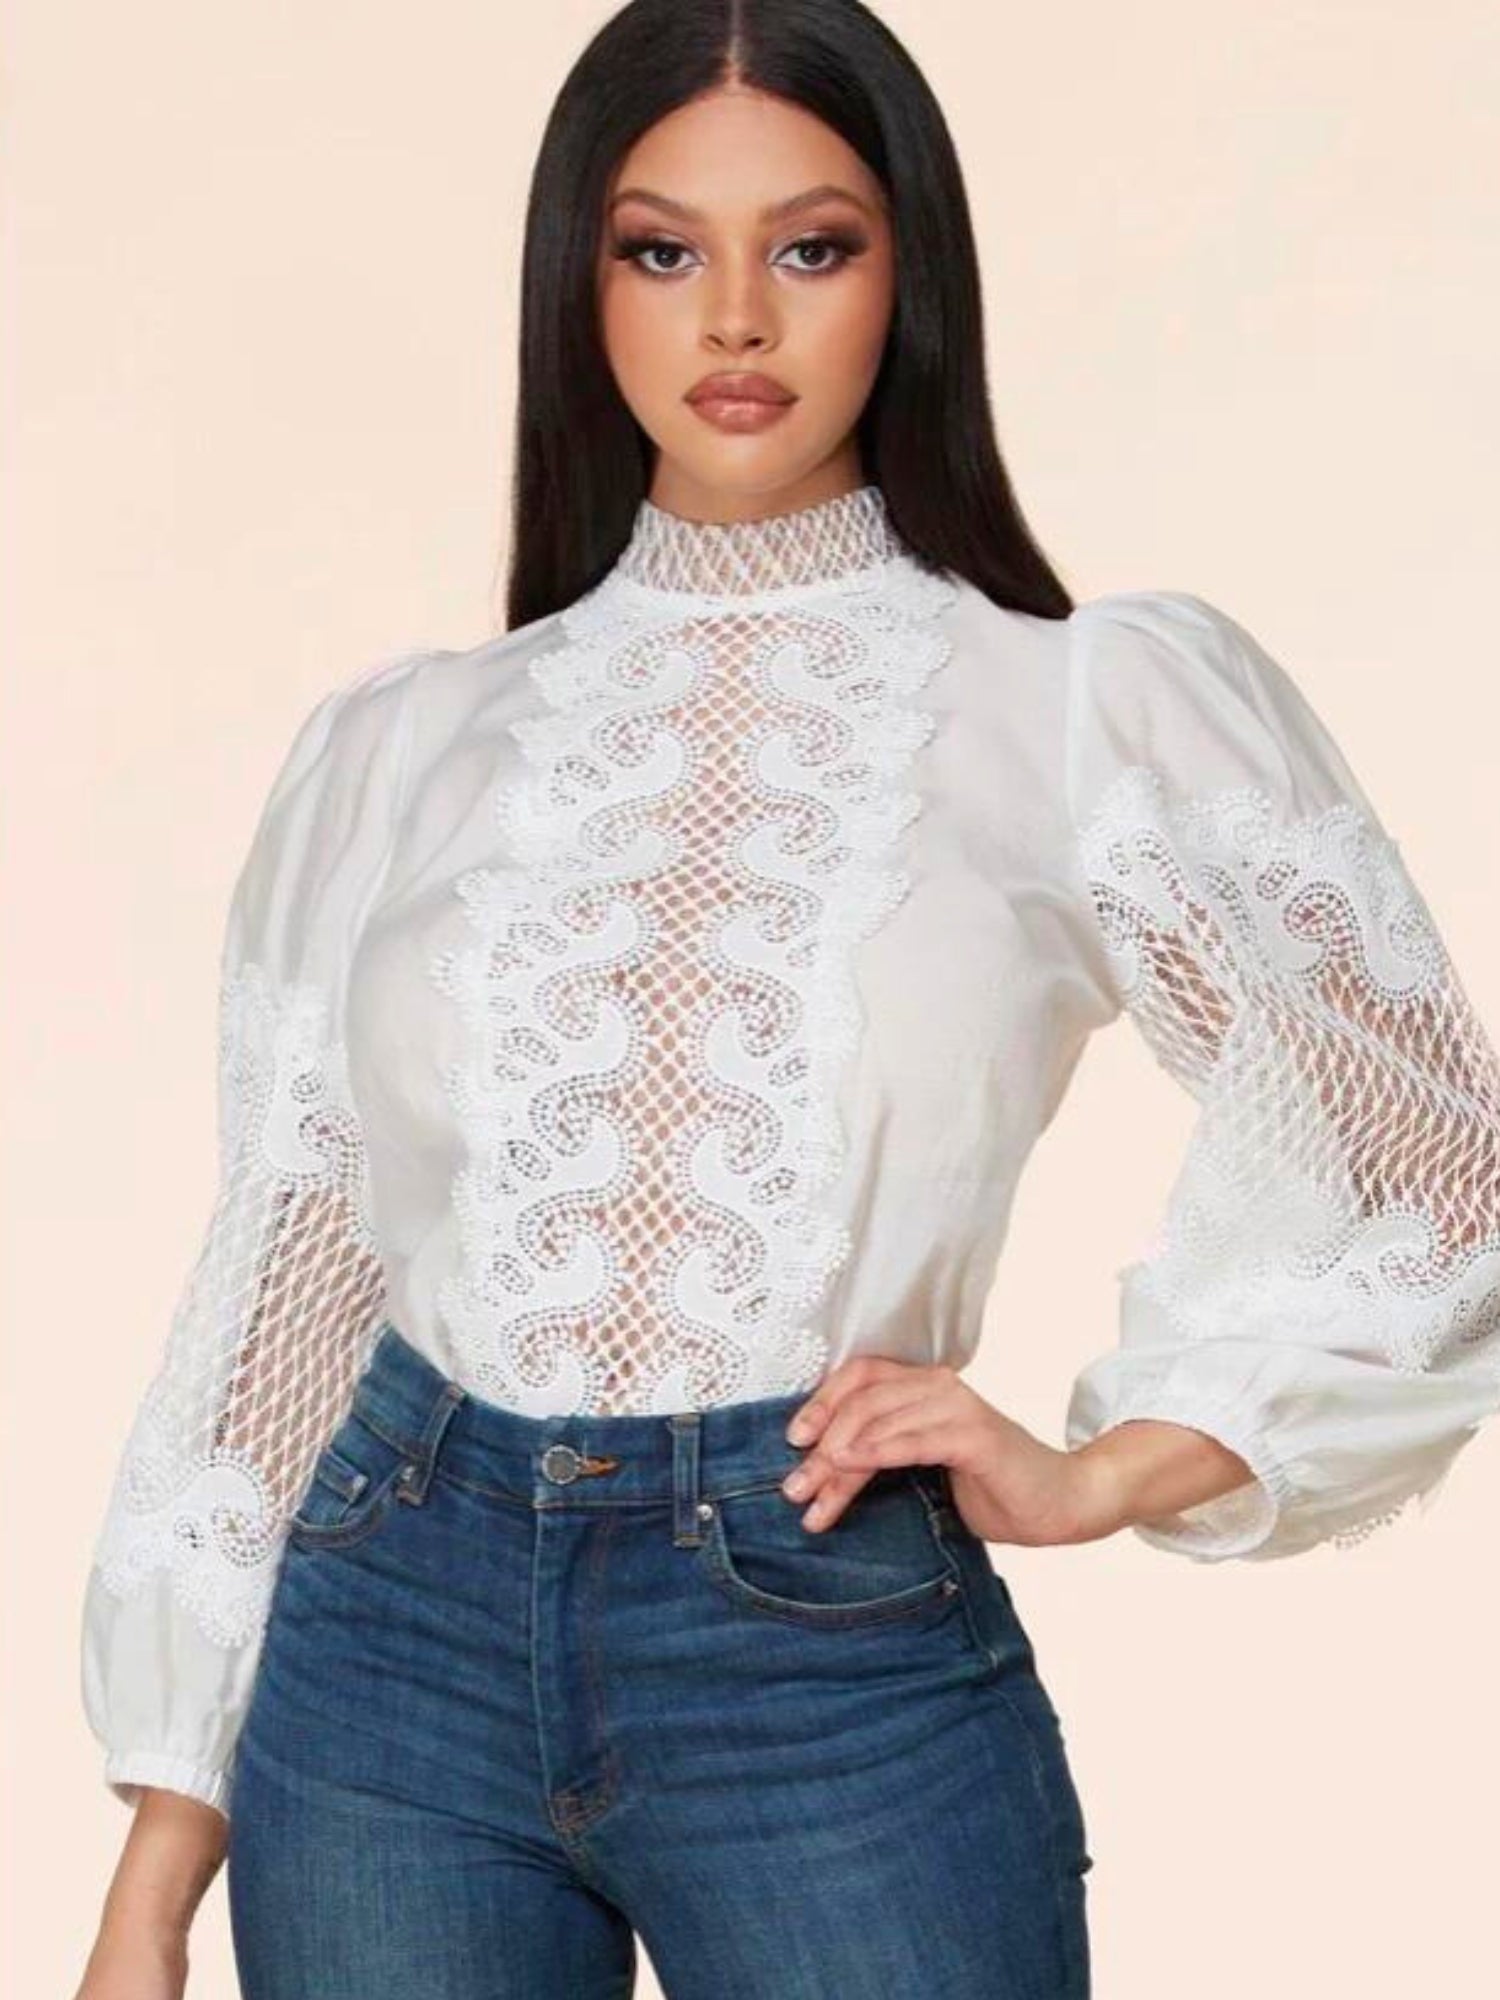 The Hocus Pocus Long-Sleeved Blouse - The Hocus Pocus Long-Sleeved Blouse is a gorgeous staple for your wardrobe. Featuring a detailed crochet design and a cute back bow, this top is sure to become a firm favorite in your collection. - Ivory Sheep Collect